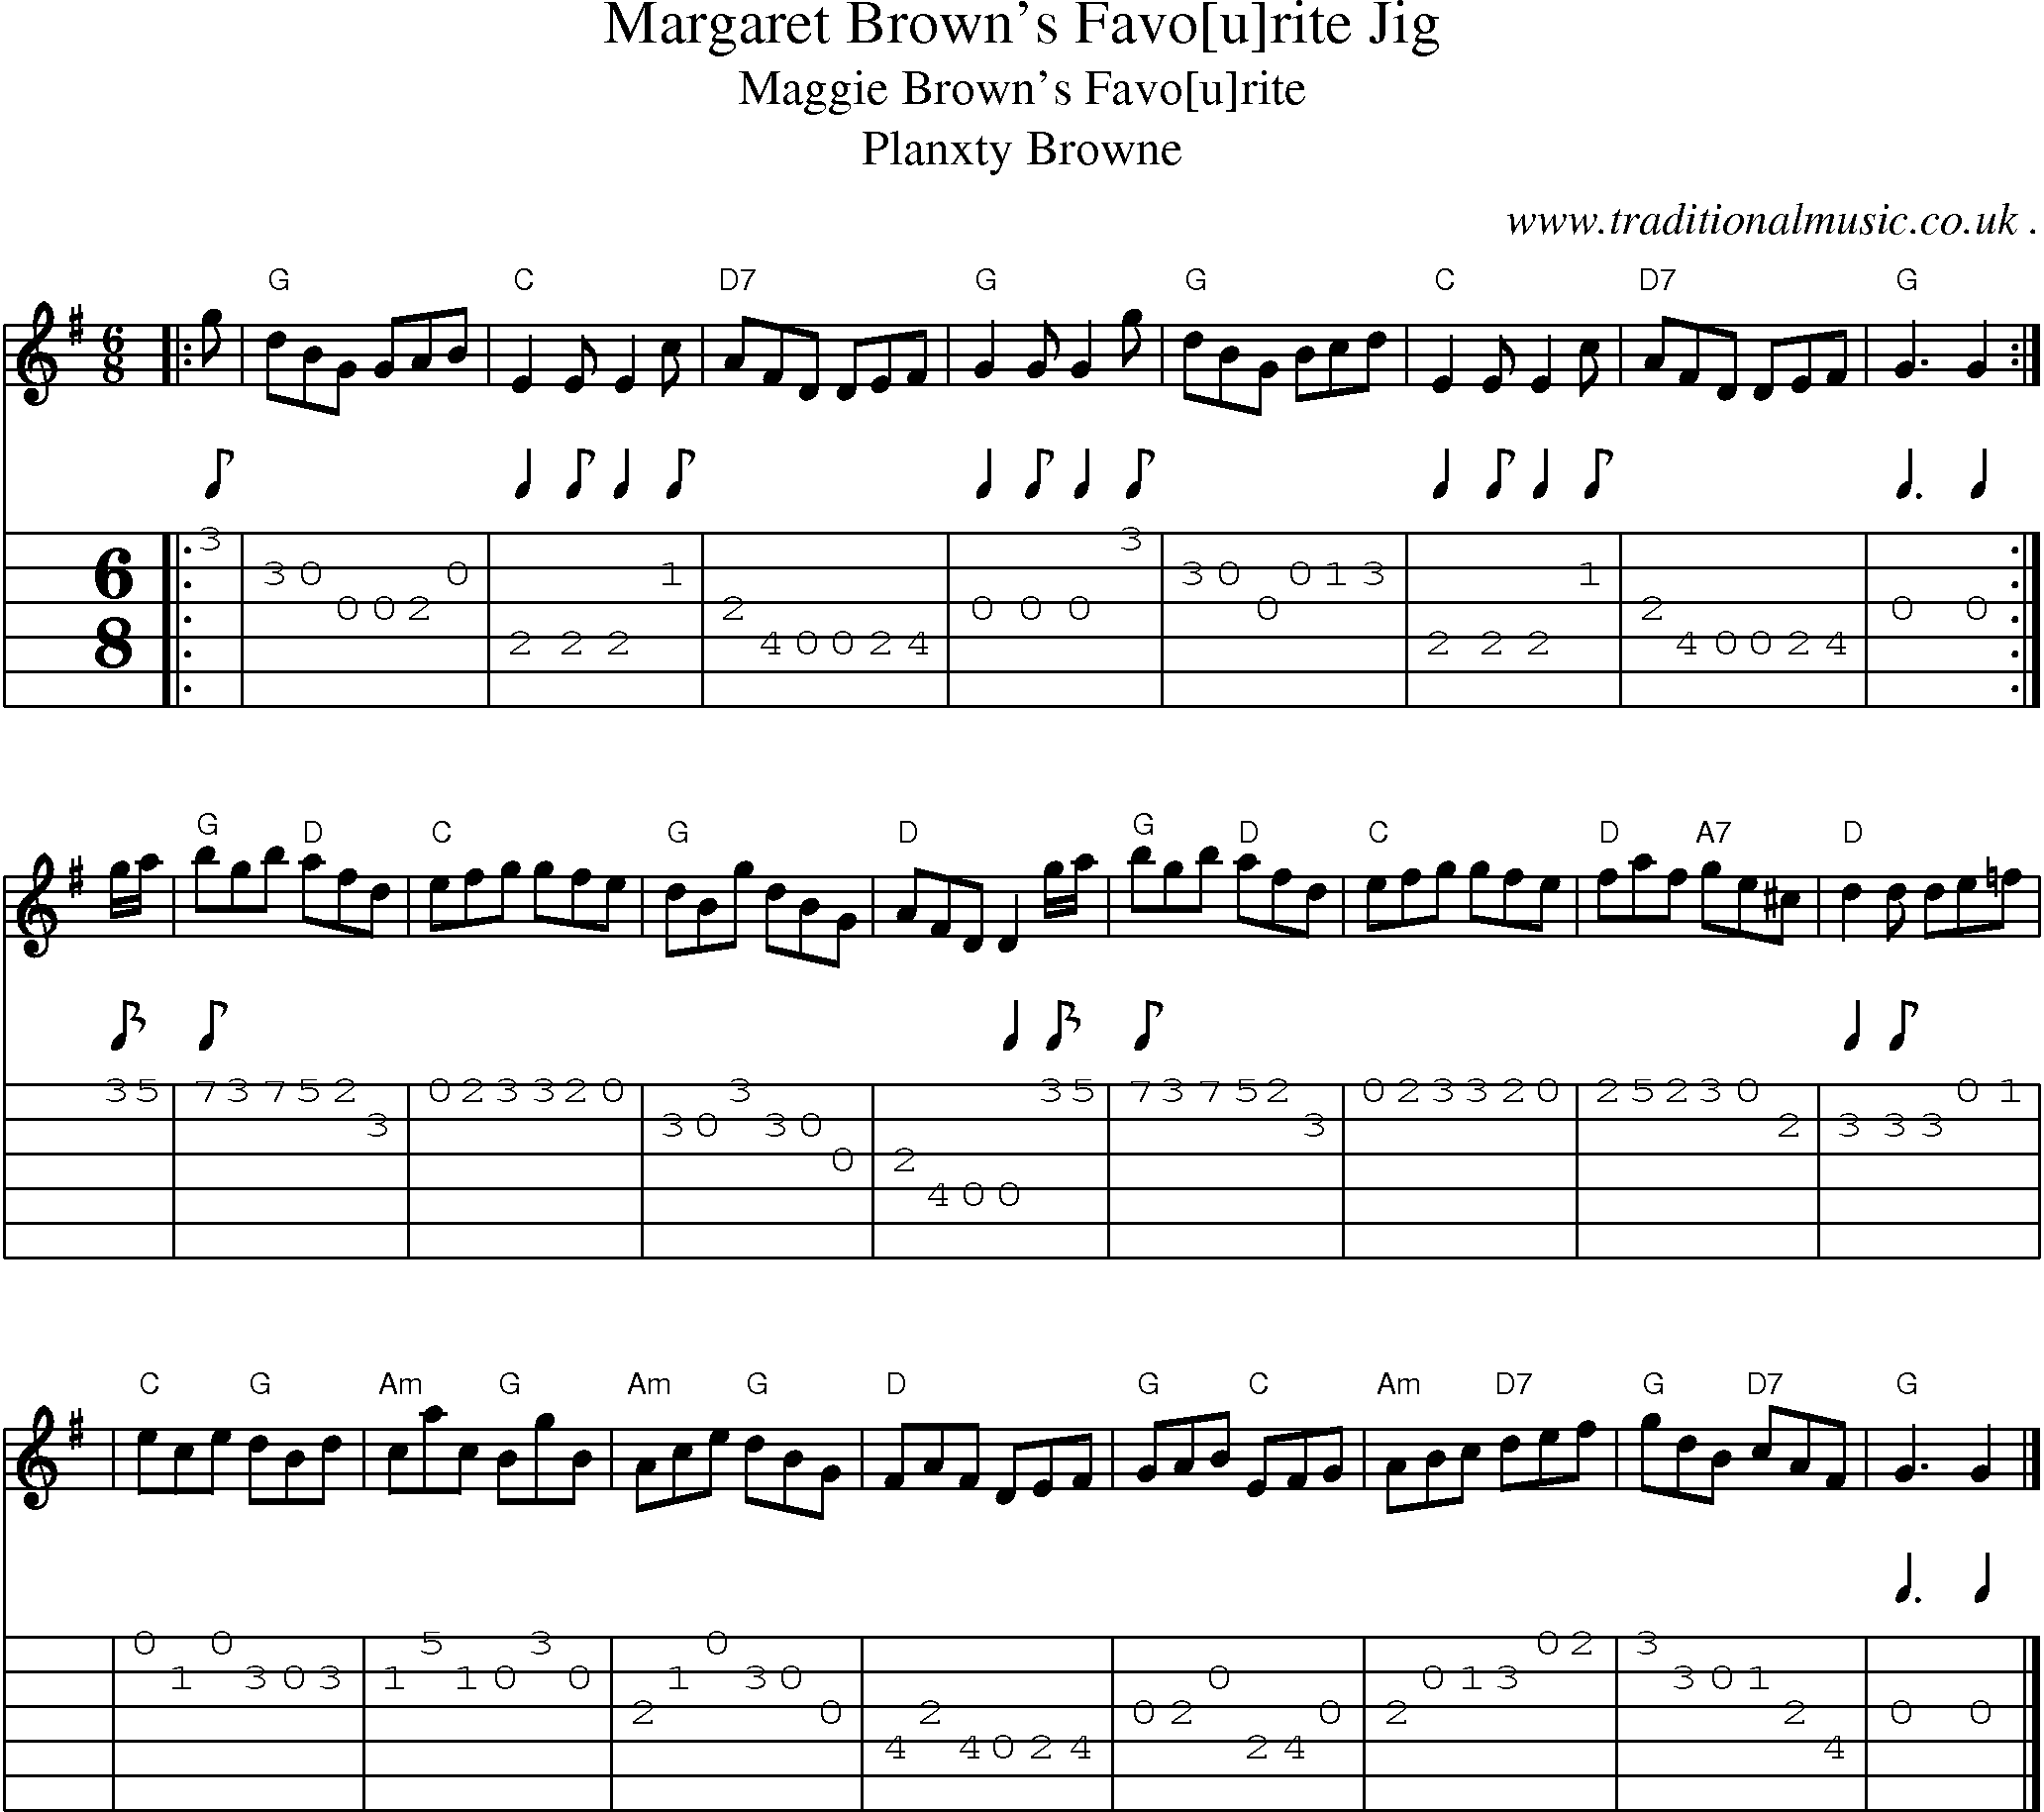 Sheet-music  score, Chords and Guitar Tabs for Margaret Browns Favo[u]rite Jig